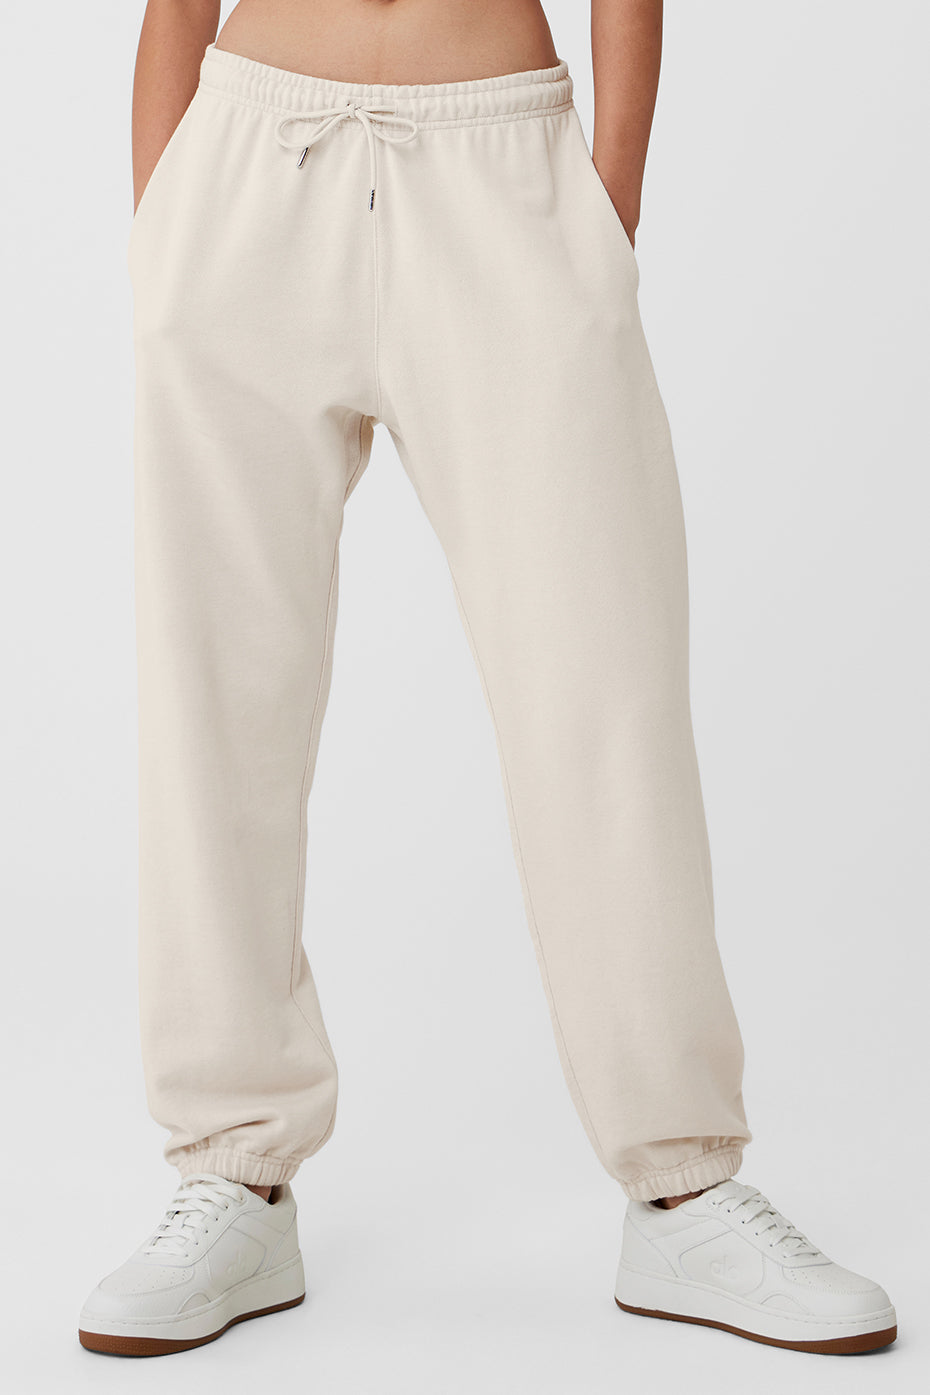 Ruched Soft Sculpt Pant - Taupe